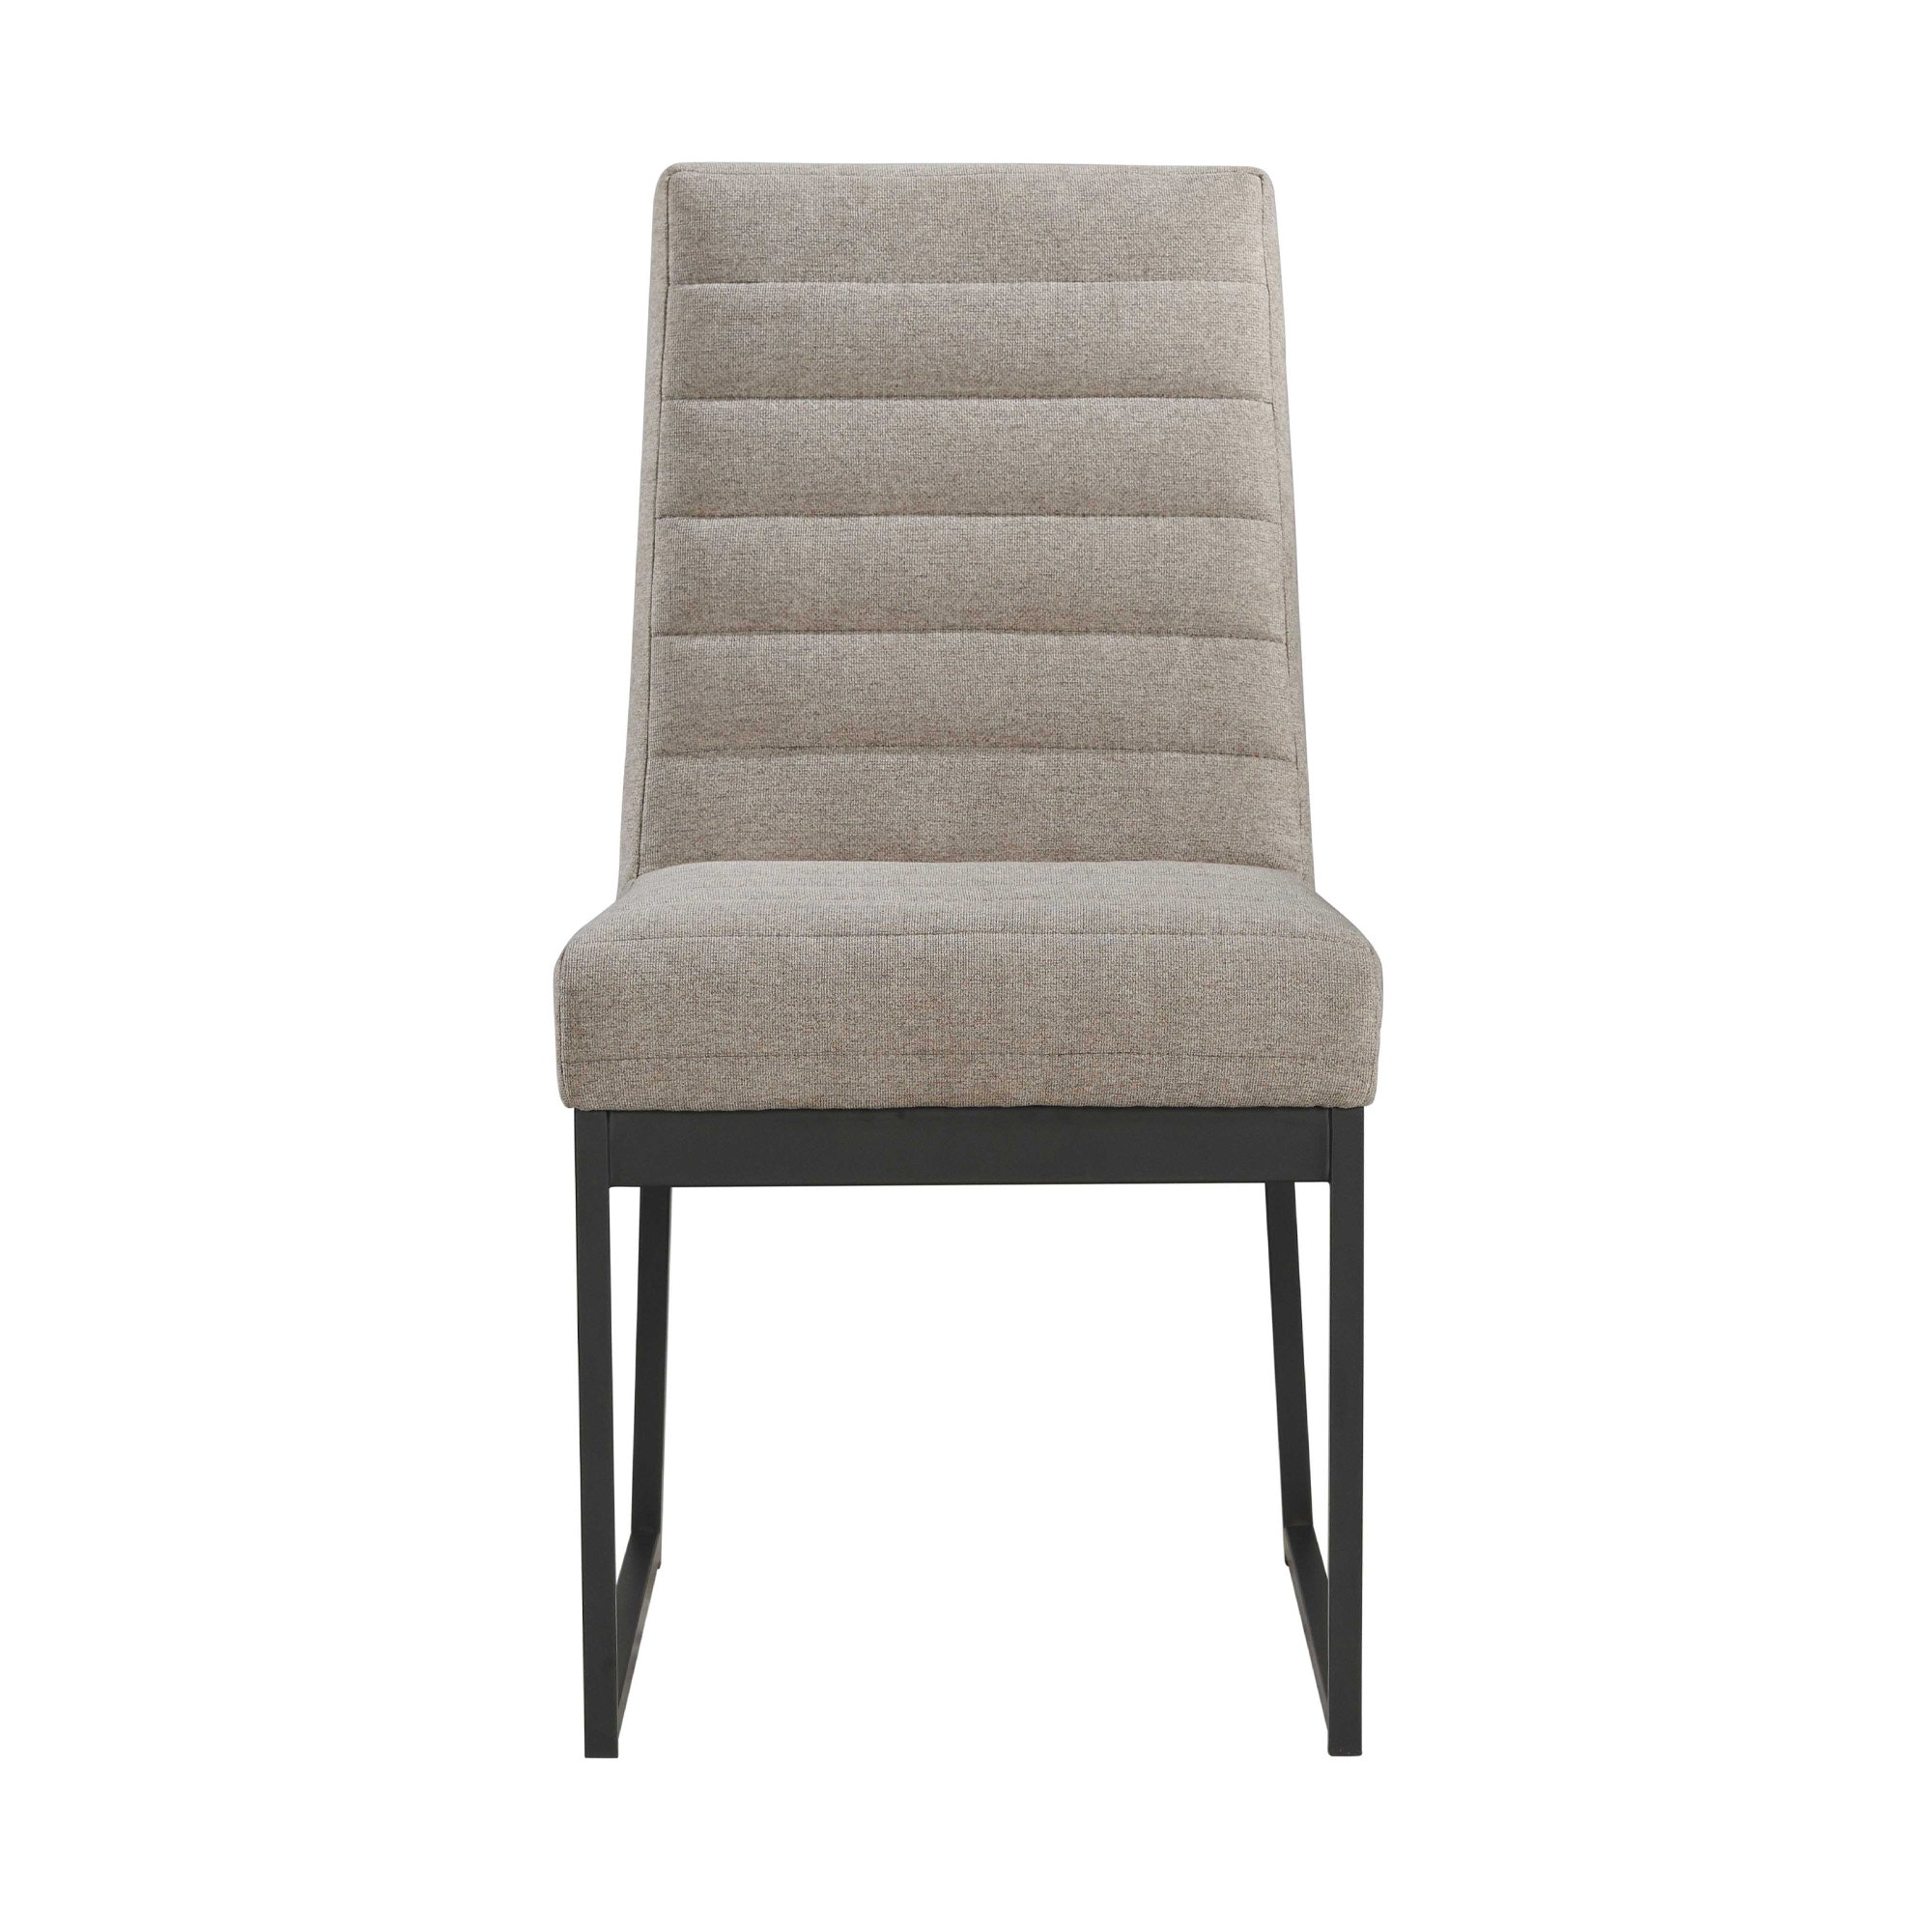 Intercon Casual Dining Eden Upholstered Chair ED-CH-380C-DNE